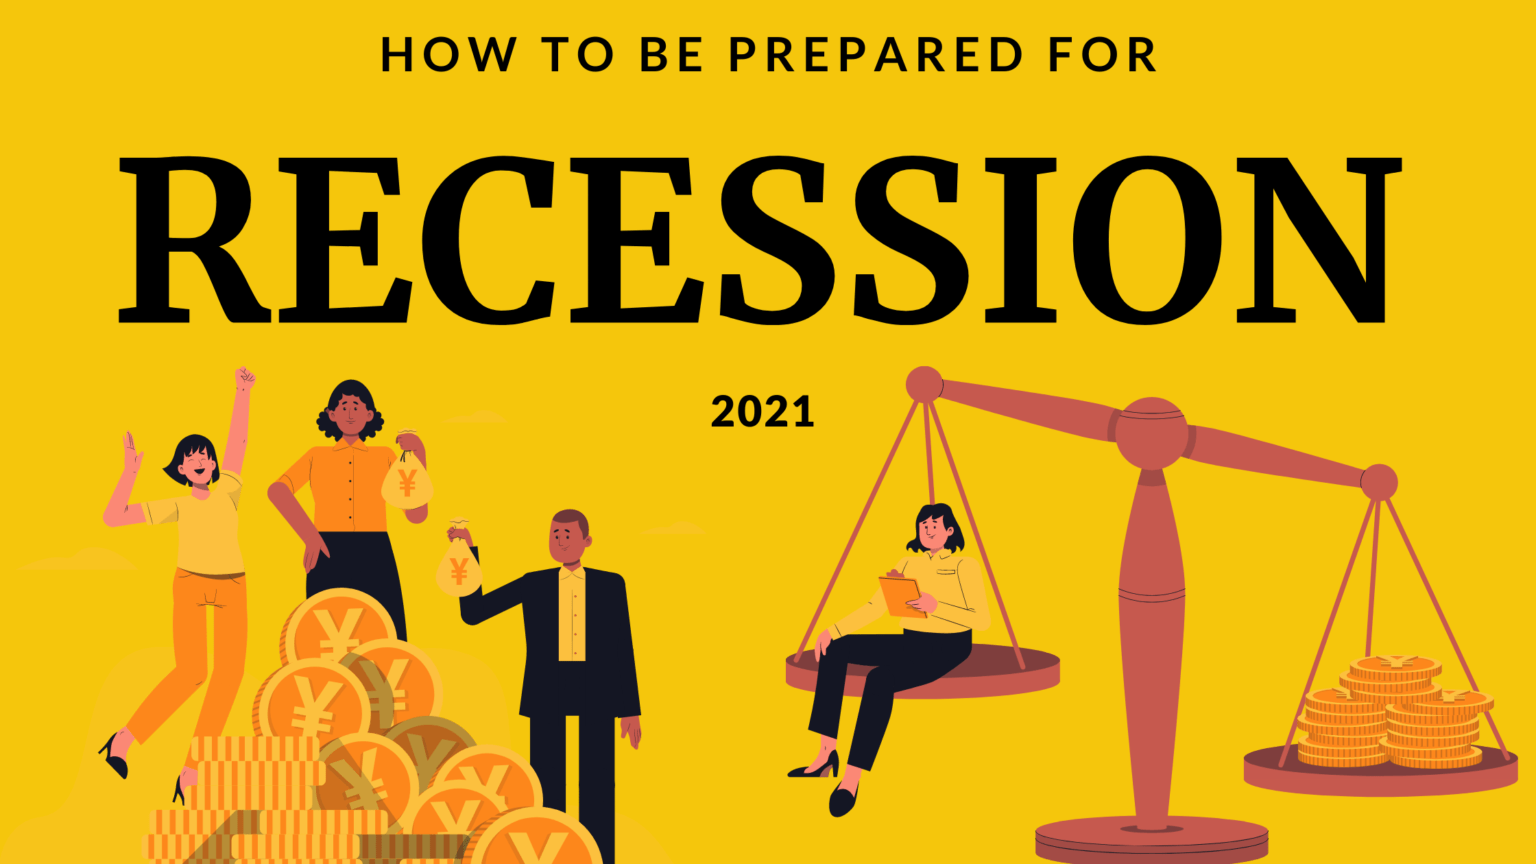 HOW TO PREPARE FOR RECESSION AND BE FINANCIALLY STRONG.